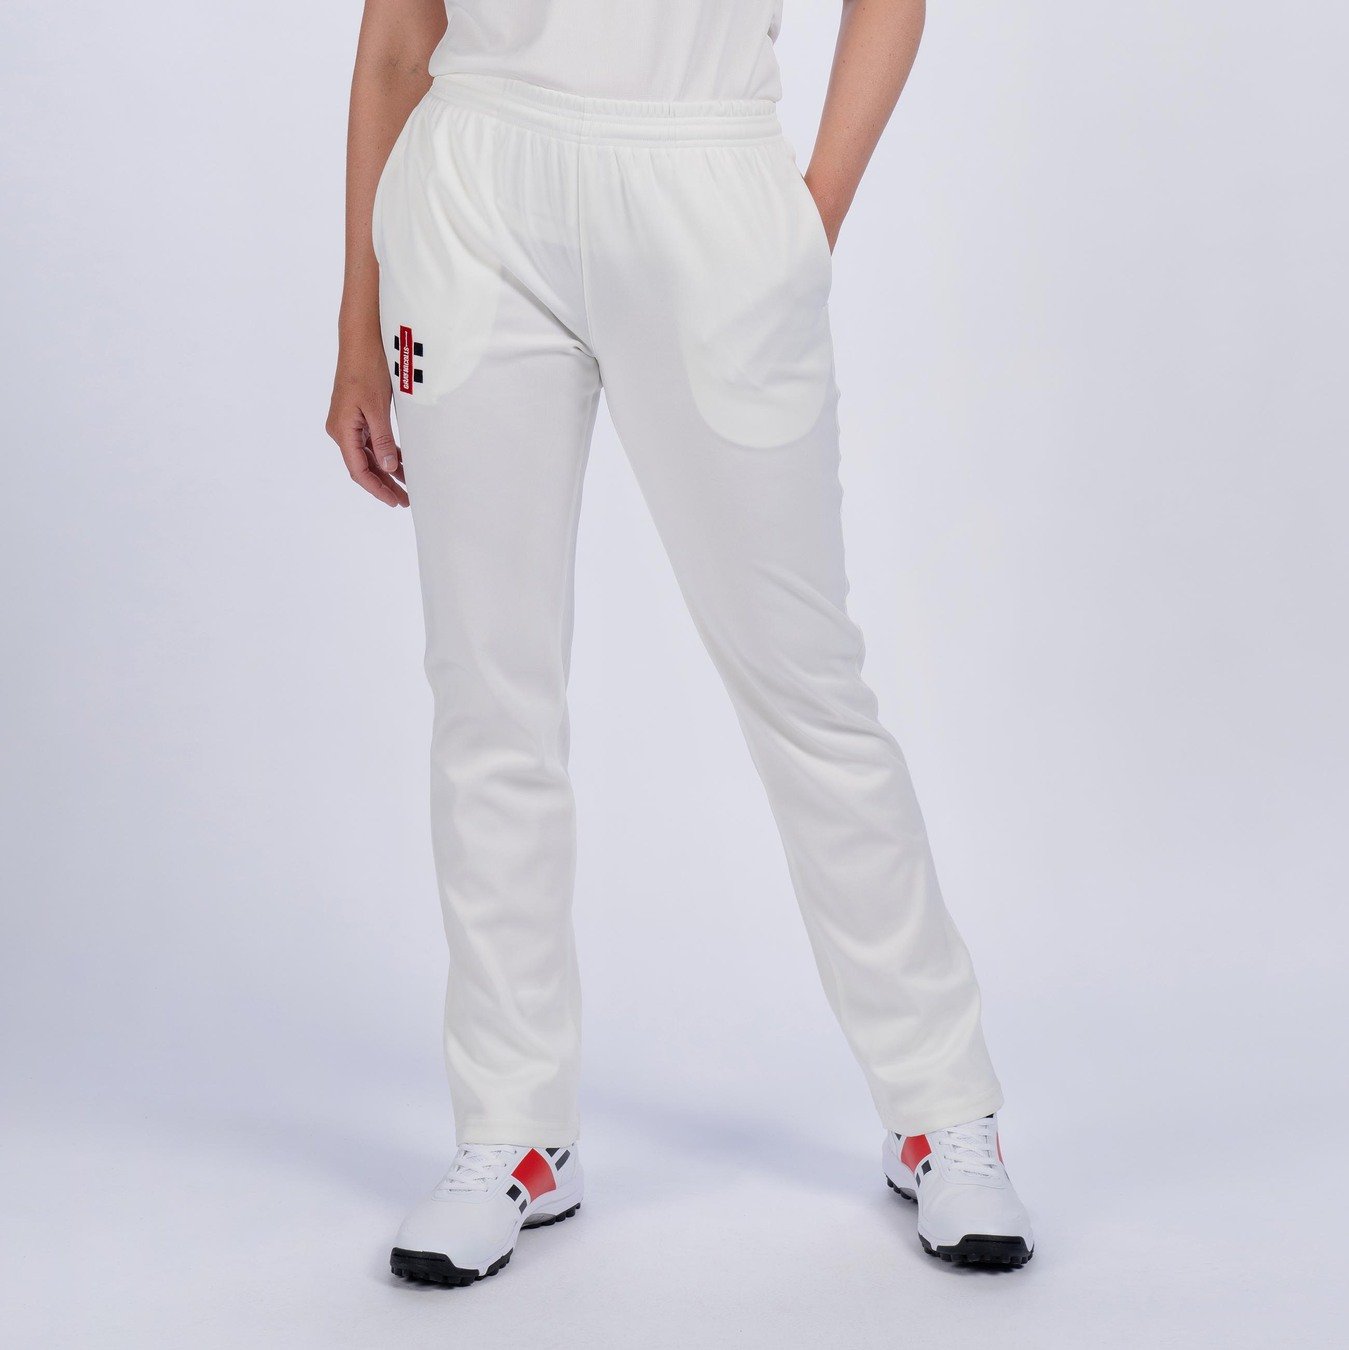 CCBG22Clothing Trousers Matrix V2 Ivory Ladies 1 Front